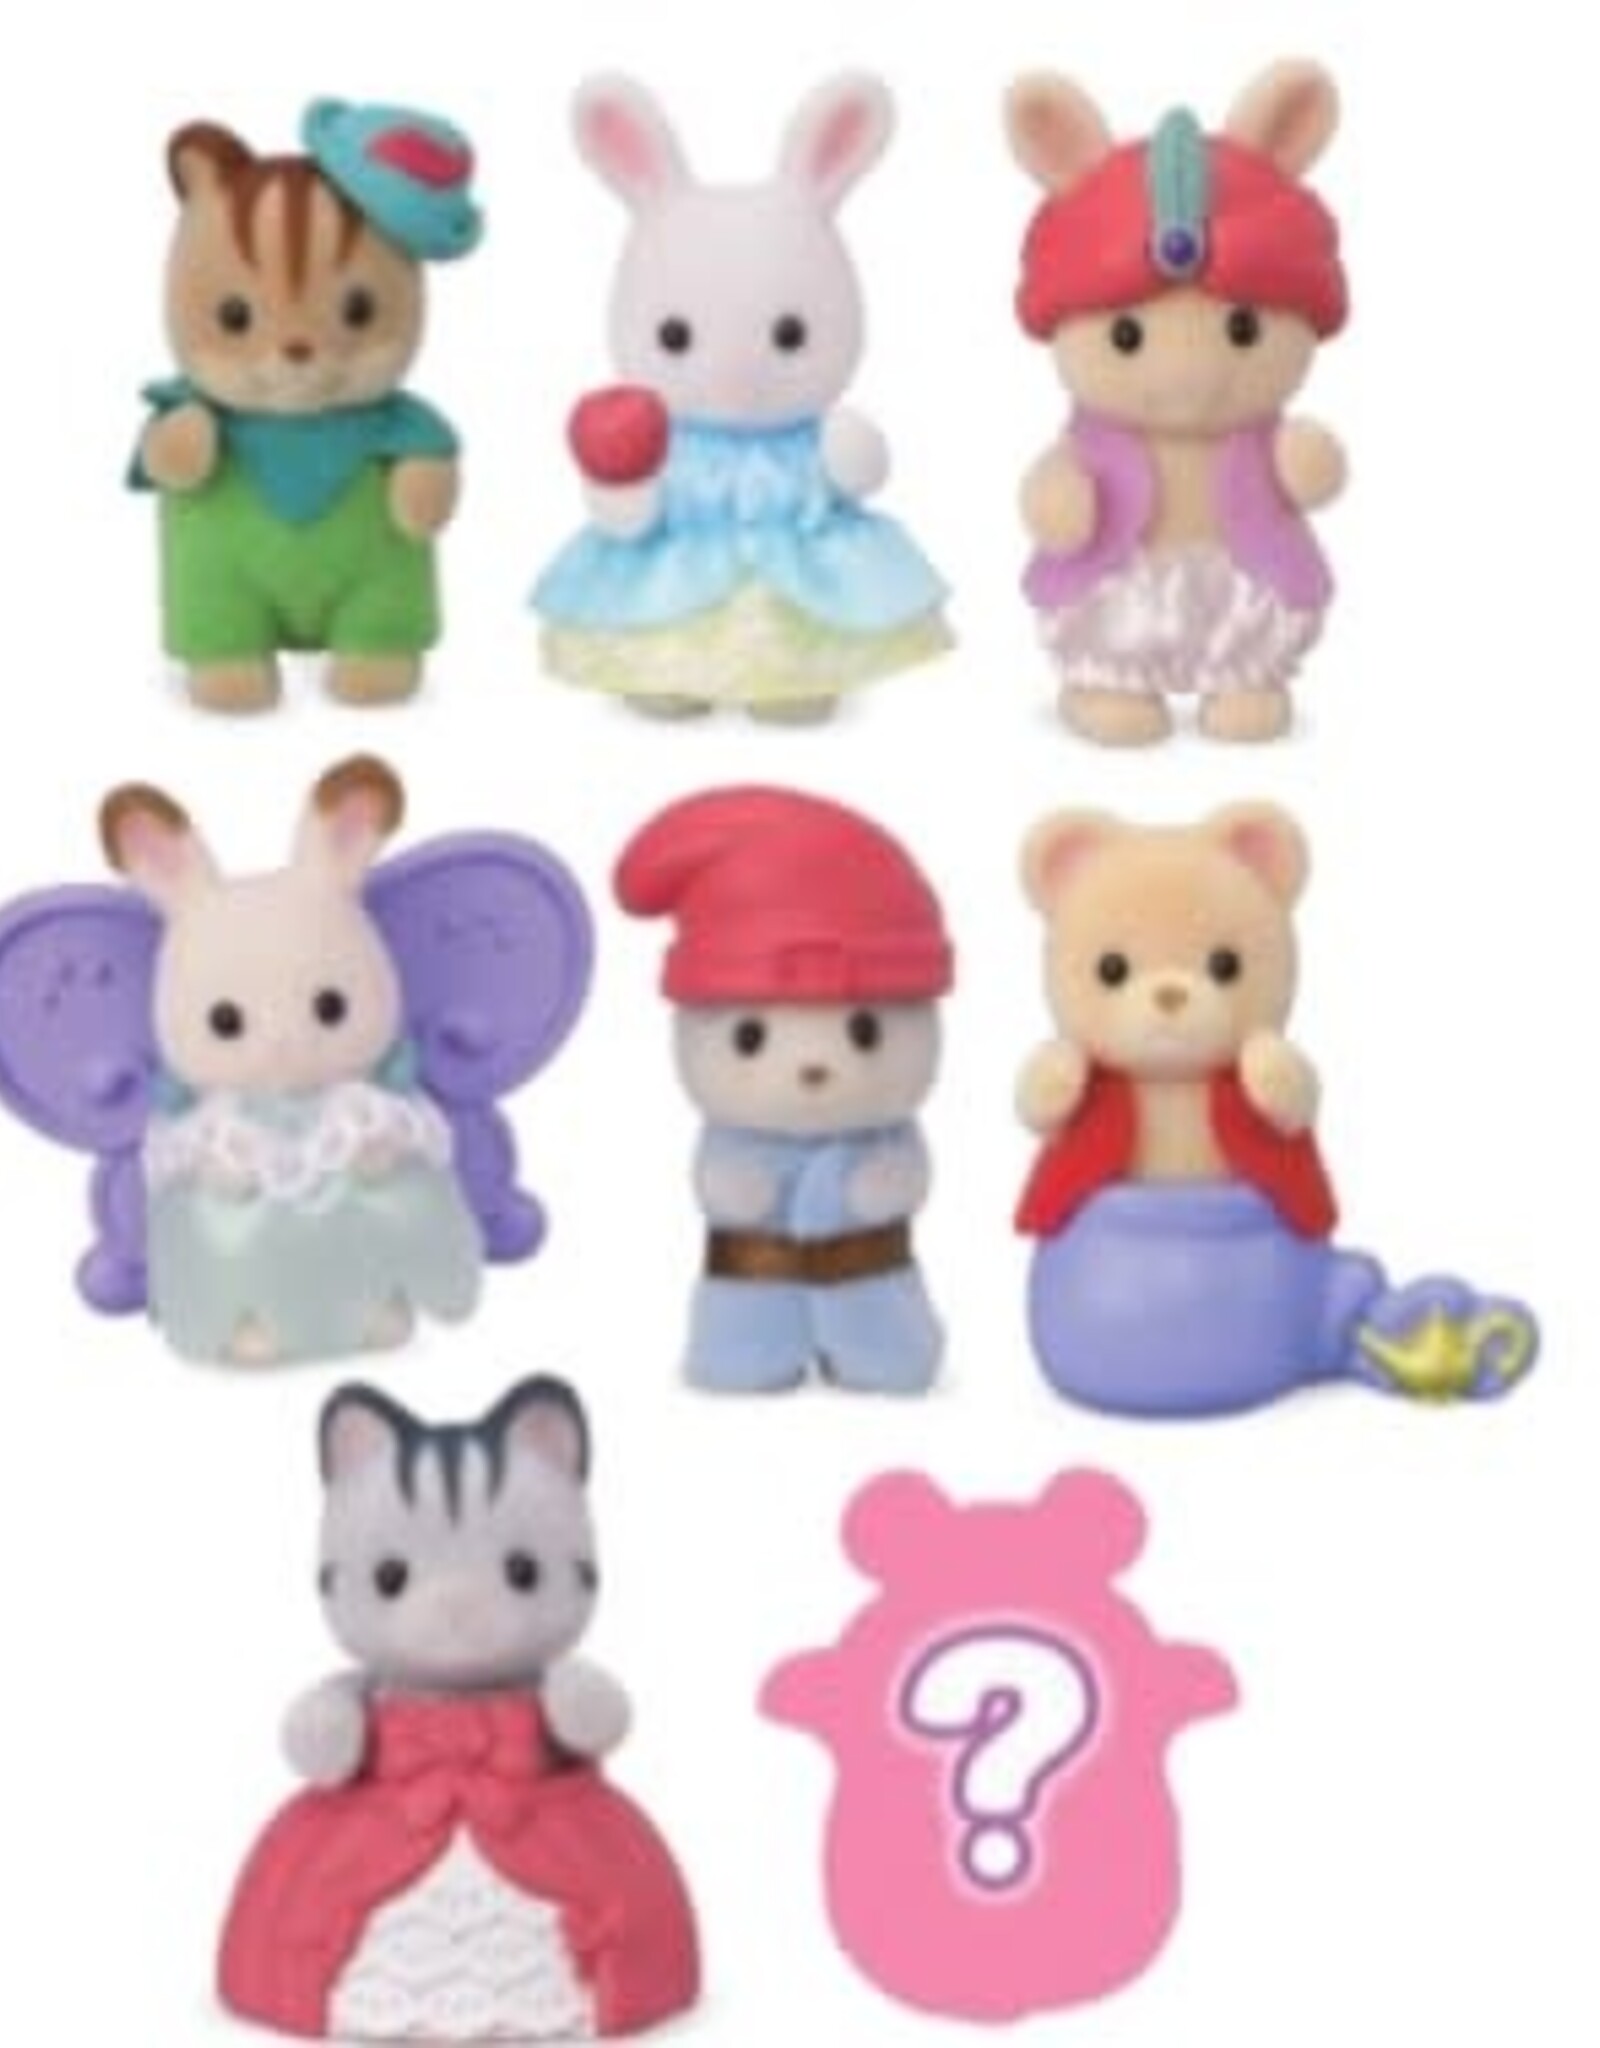 https://cdn.shoplightspeed.com/shops/634329/files/56104801/1600x2048x1/calico-critters-baby-collectibles-baby-fairy-tale.jpg